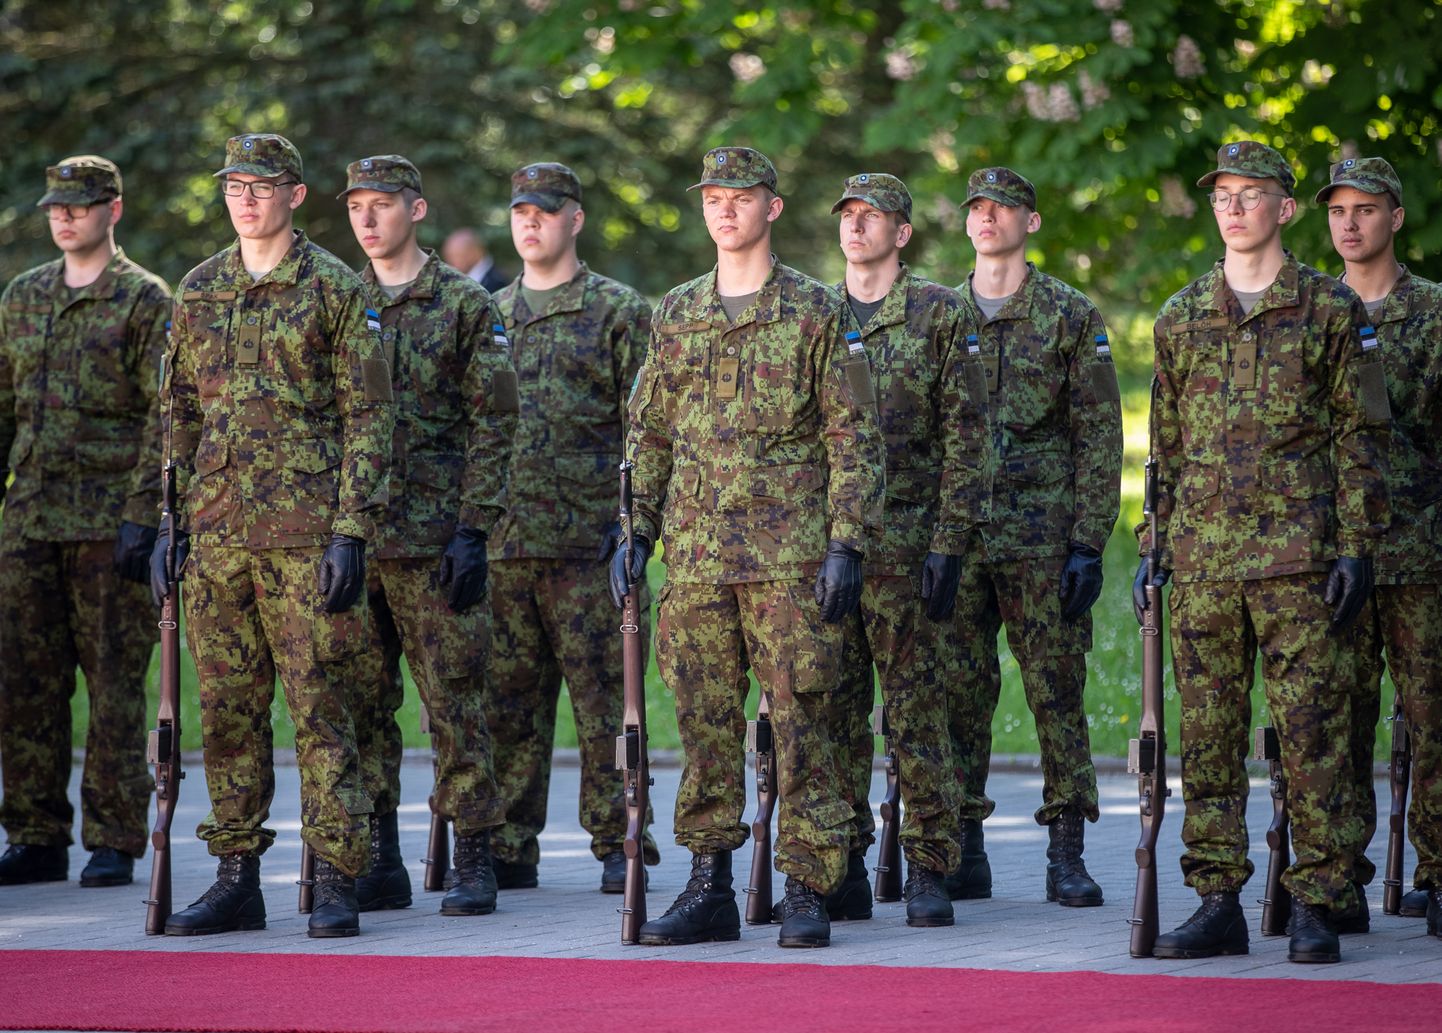 Soldiers of the Guards Battalion keeping watch over the Office of the President switched to camouflage uniforms from June 1 and will be wearing these at all future events and ceremonies.